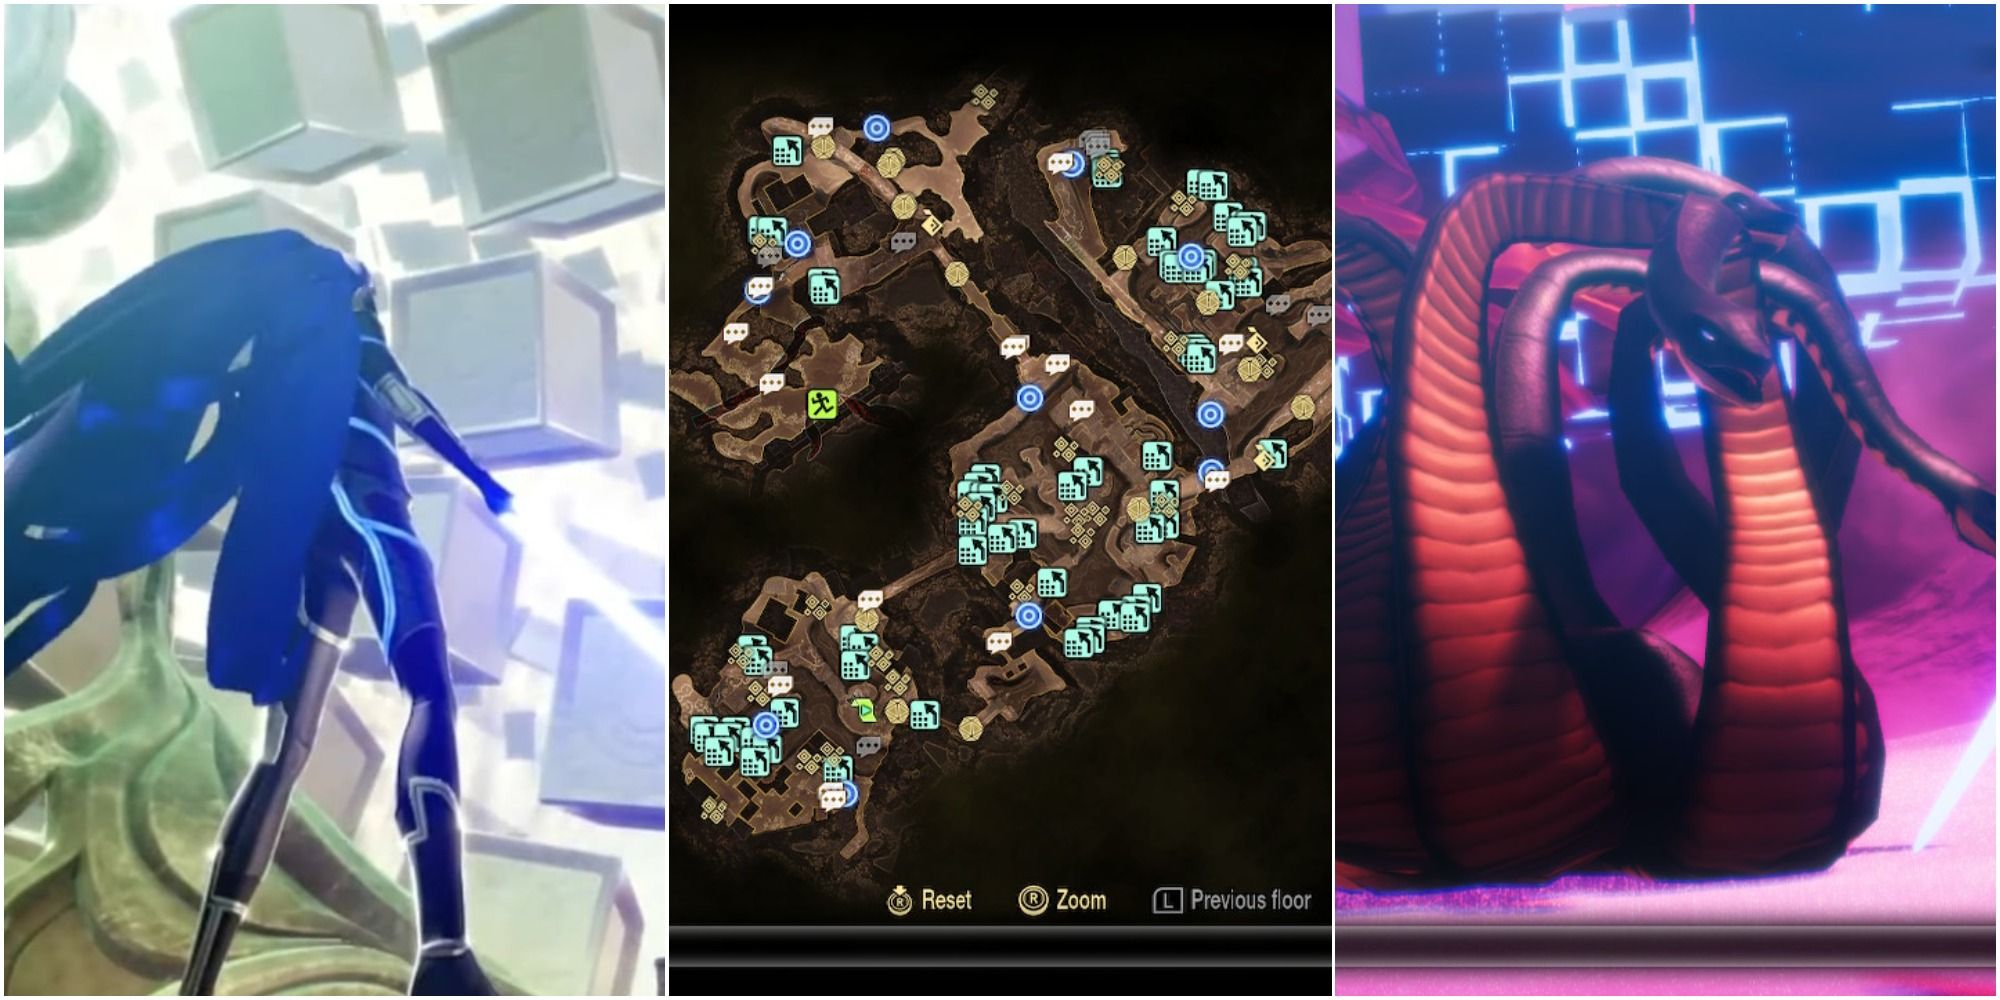 SMT 5 - collage of nahobino, chiyoda ward, and an abscess